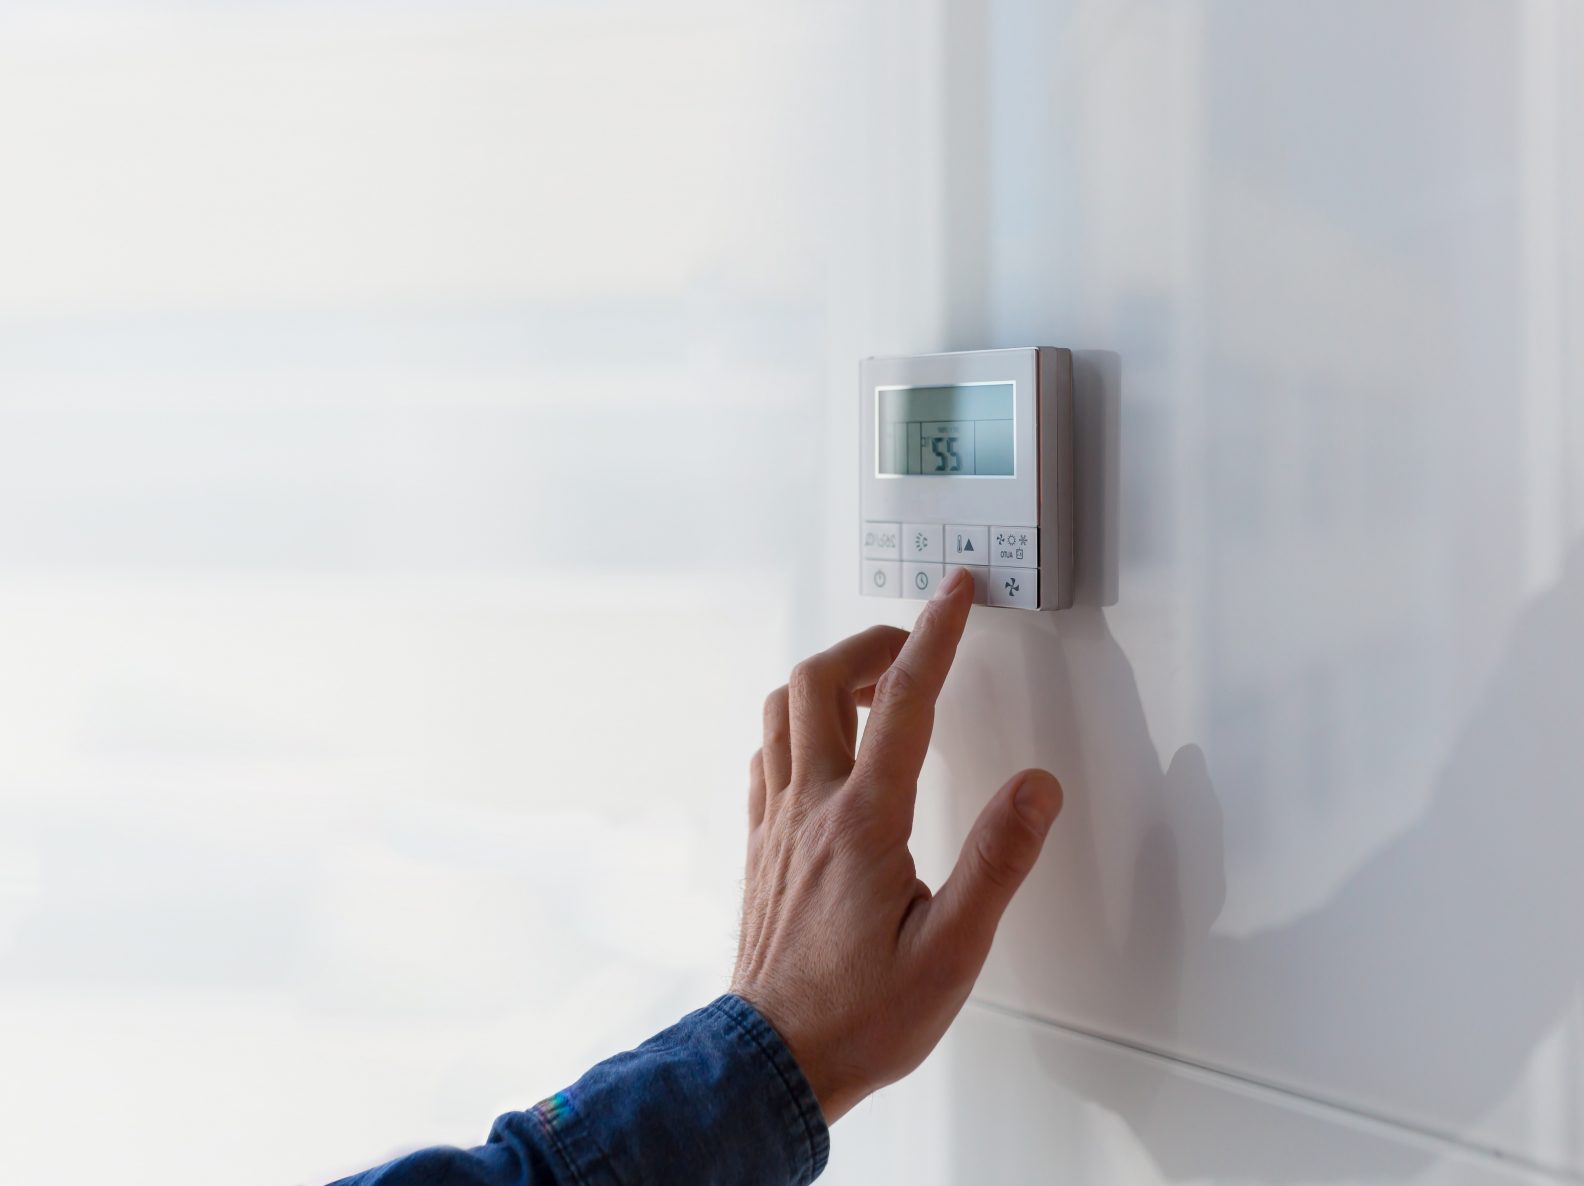 Régulation d'air The air conditioning and heating control panel for office is located on a white wall